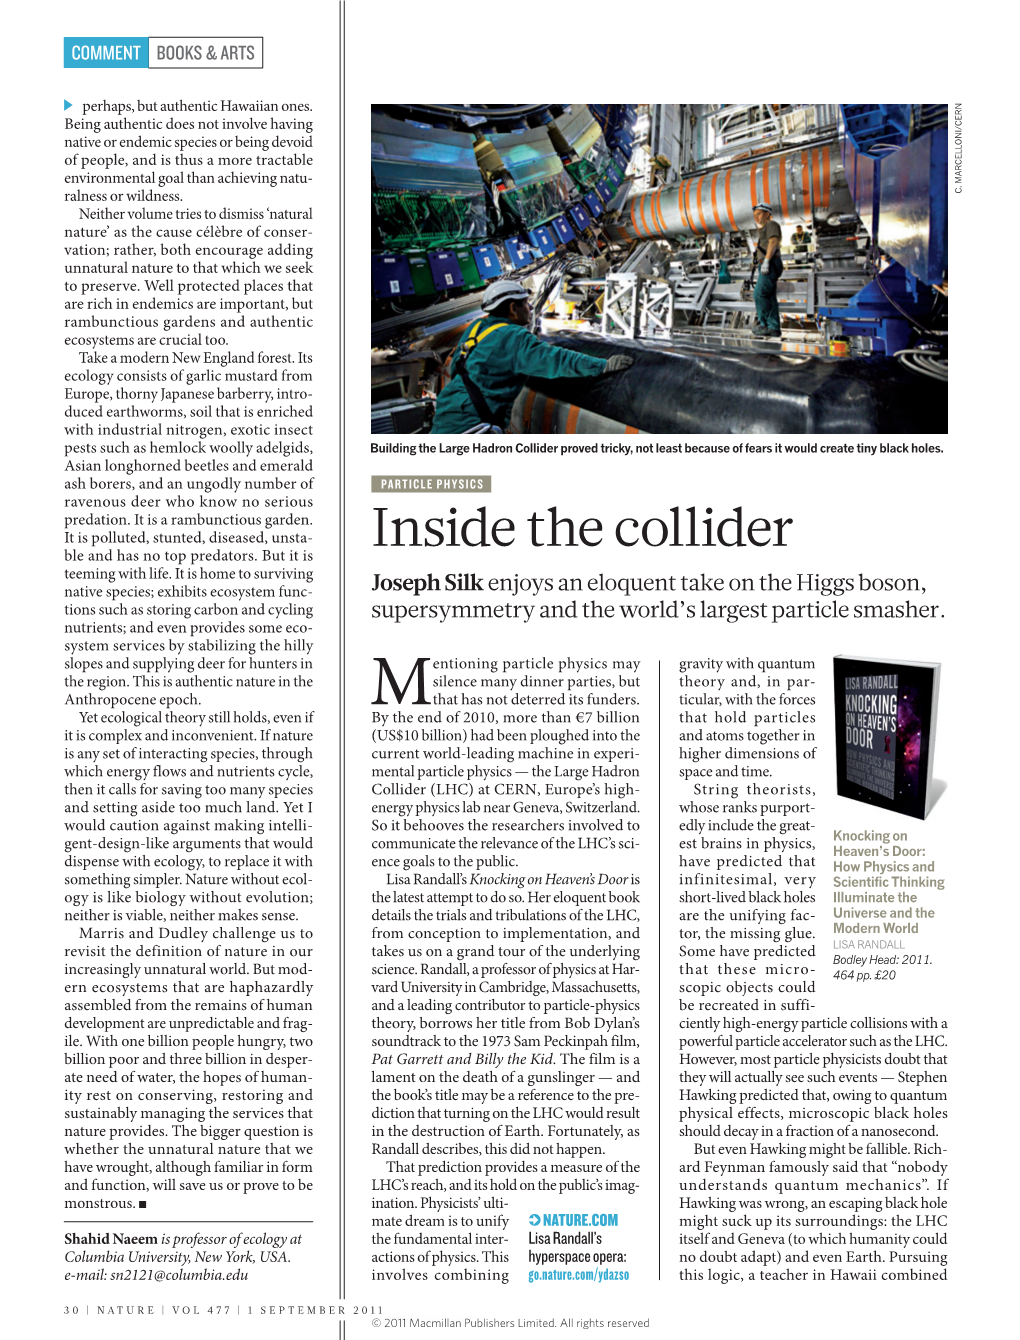 Inside the Collider Teeming with Life